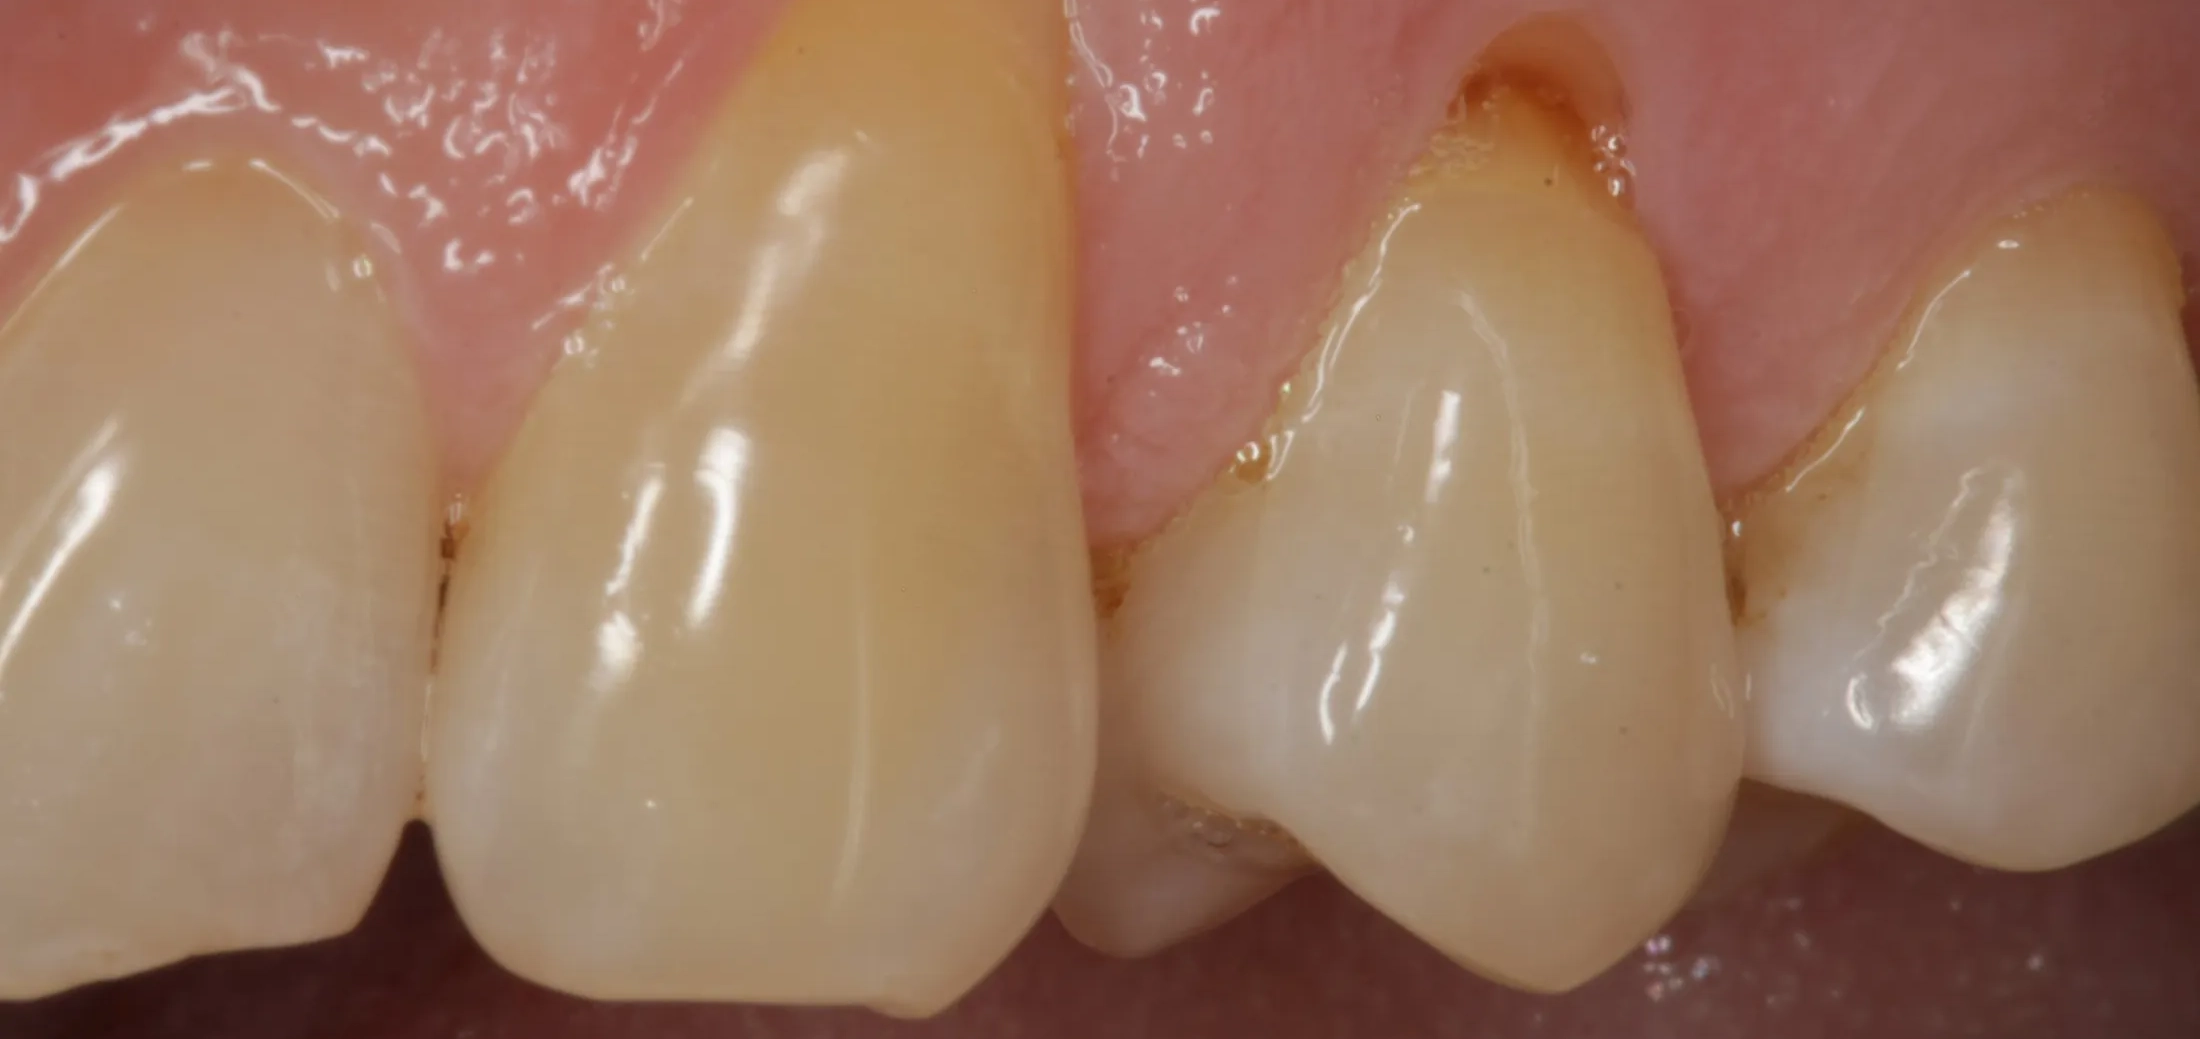 Gums before the surgical grafting intervention at Westport Periodontics.